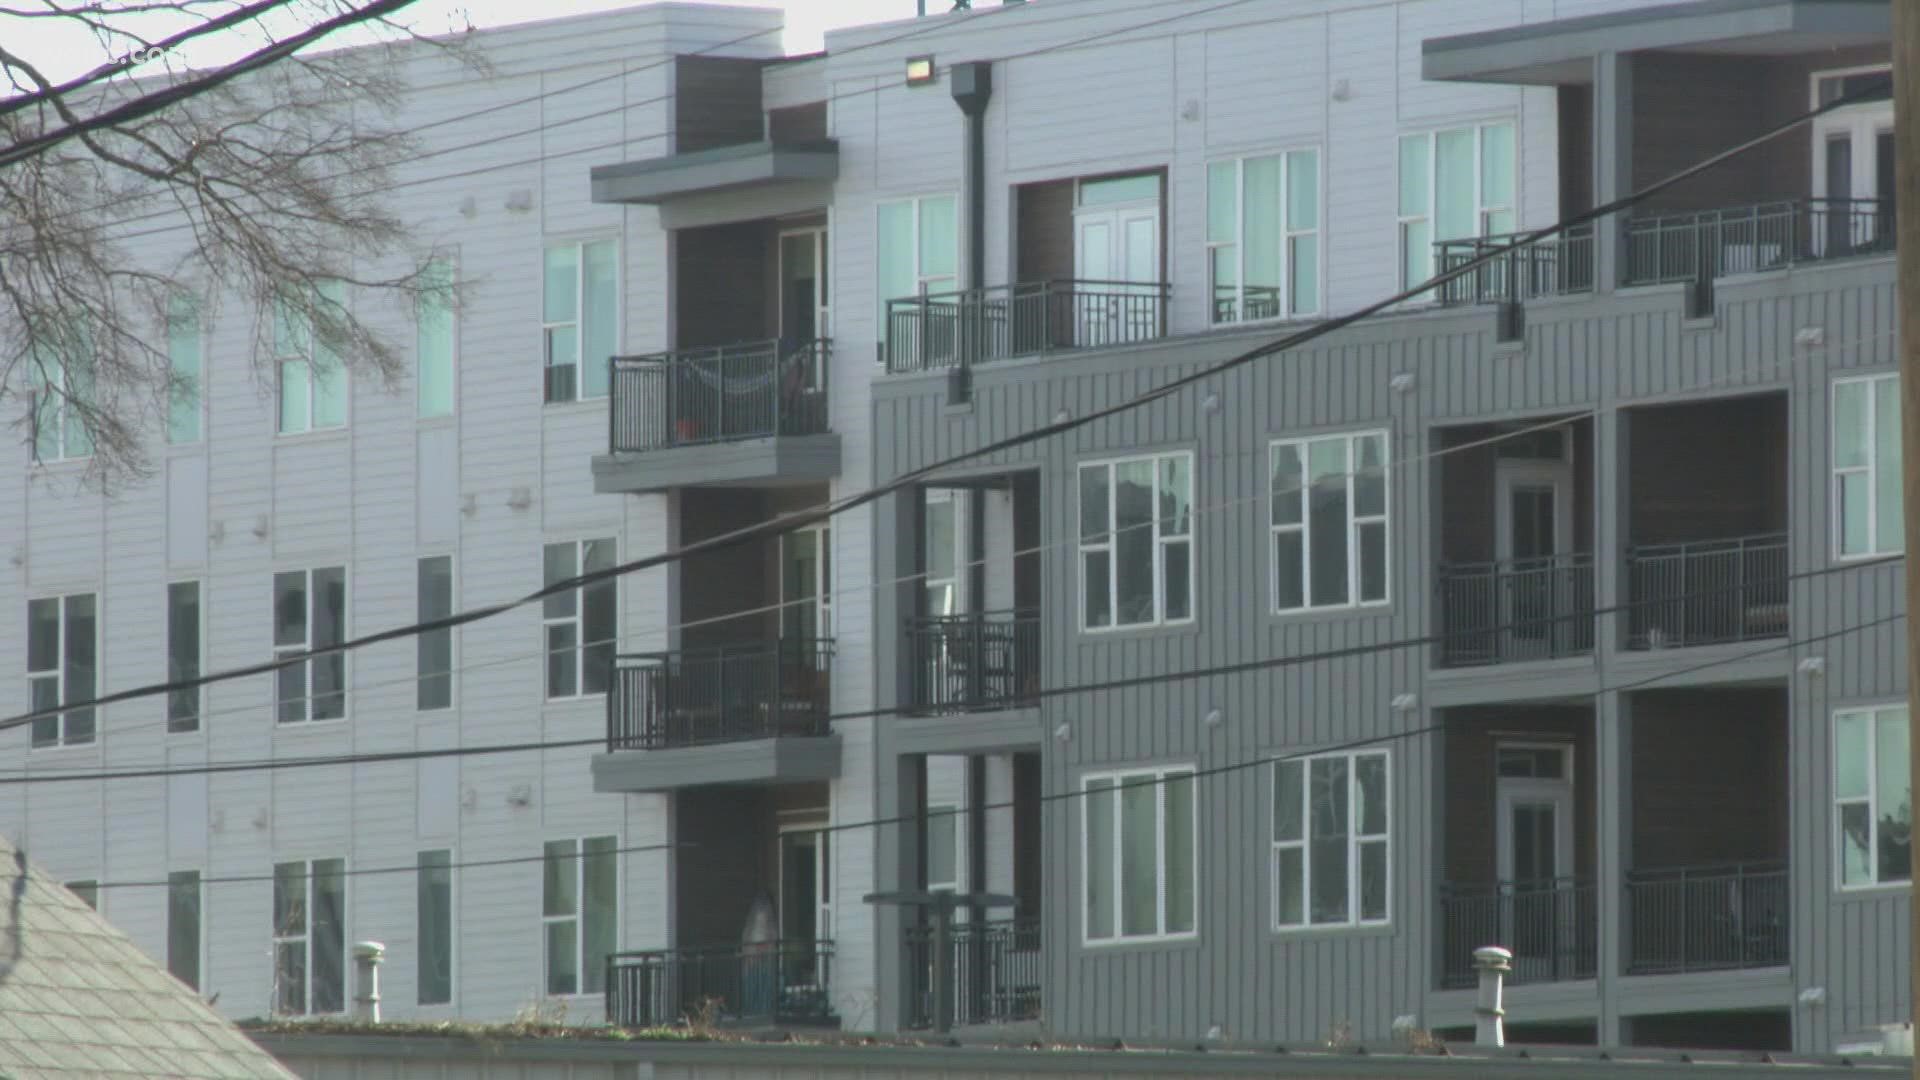 WCNC Charlotte's Brandon Goldner looks at how the infrastructure project that made South End popular could create more housing options that people can make work.